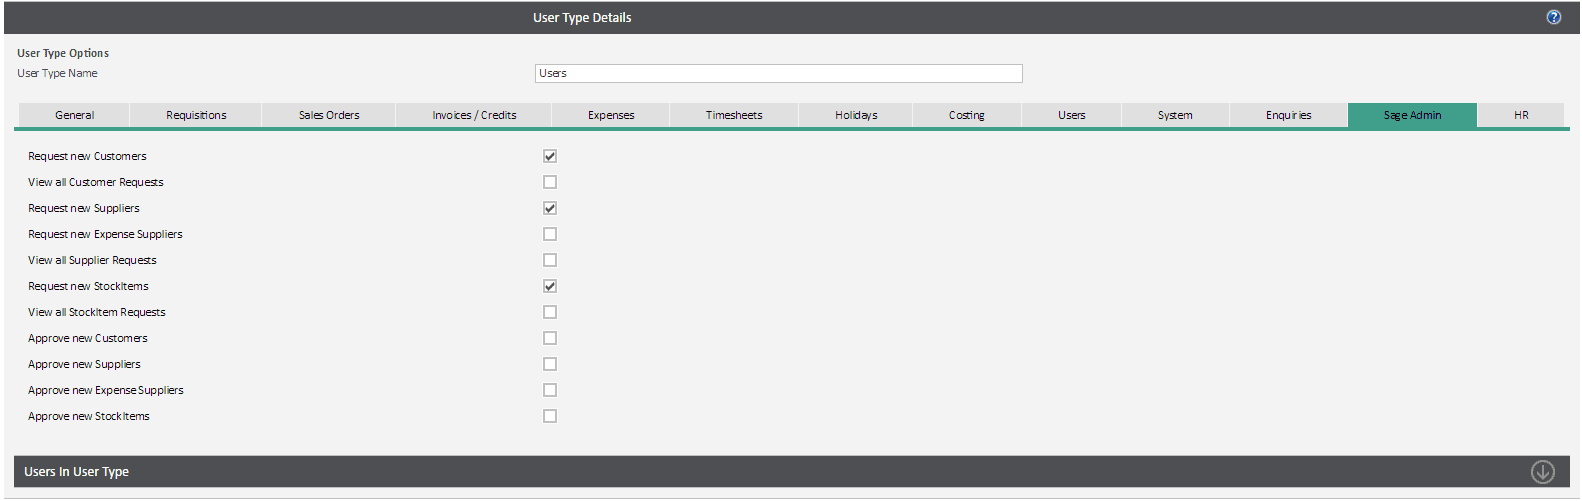 Sicon WAP System Settings Help and User Guide - Sage ADMIN